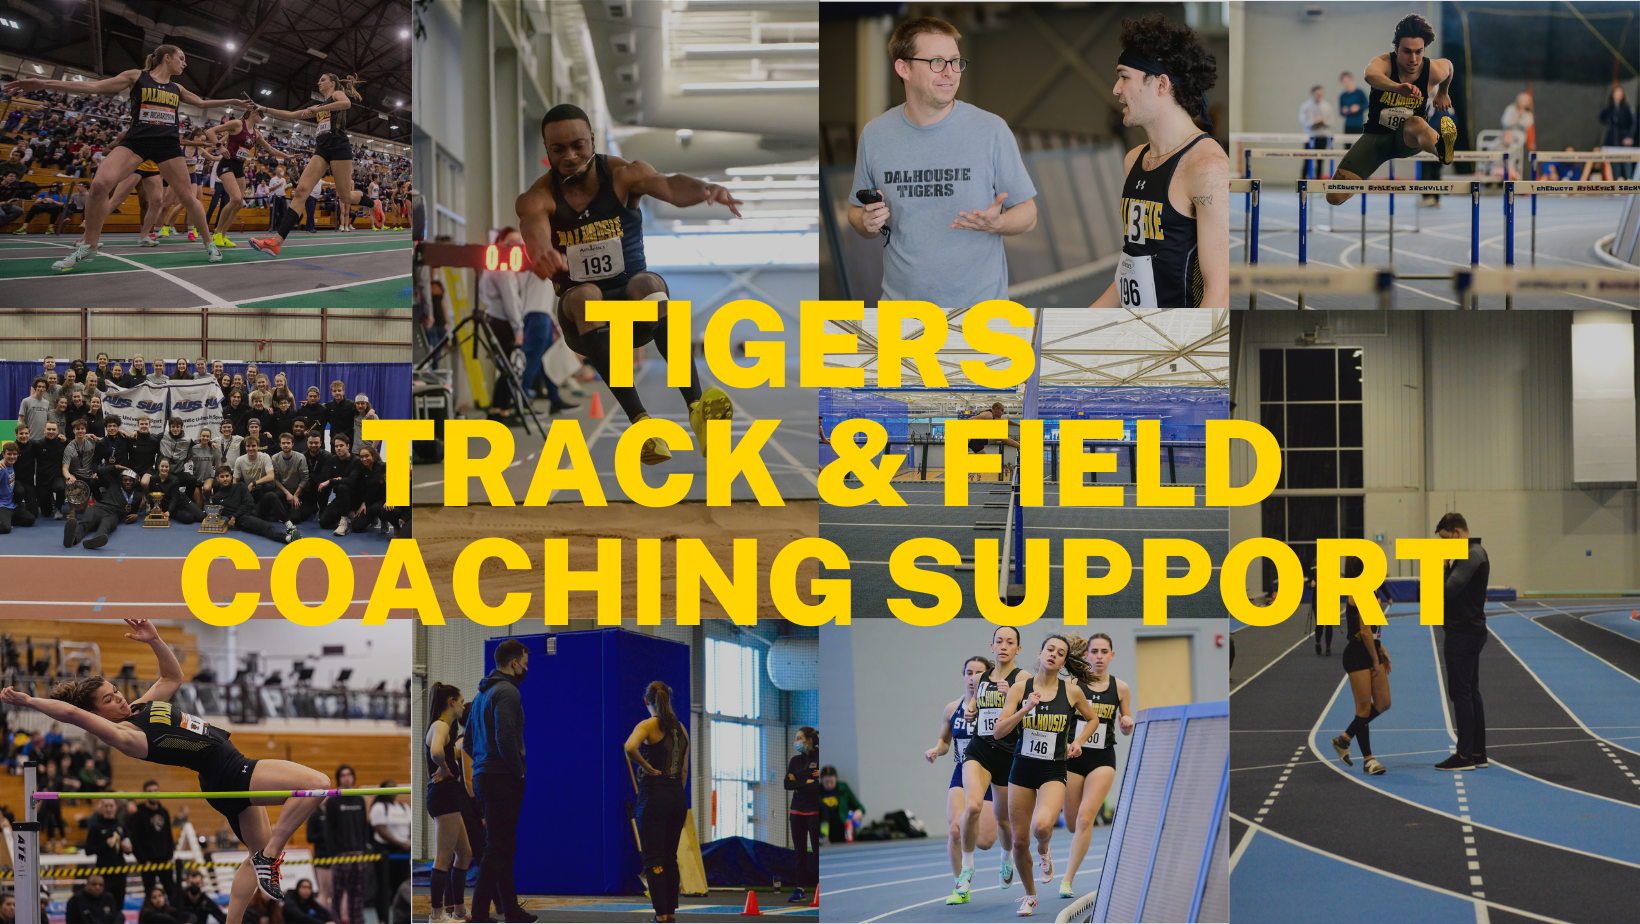 Dalhousie Tigers Track & Field Coaching Support